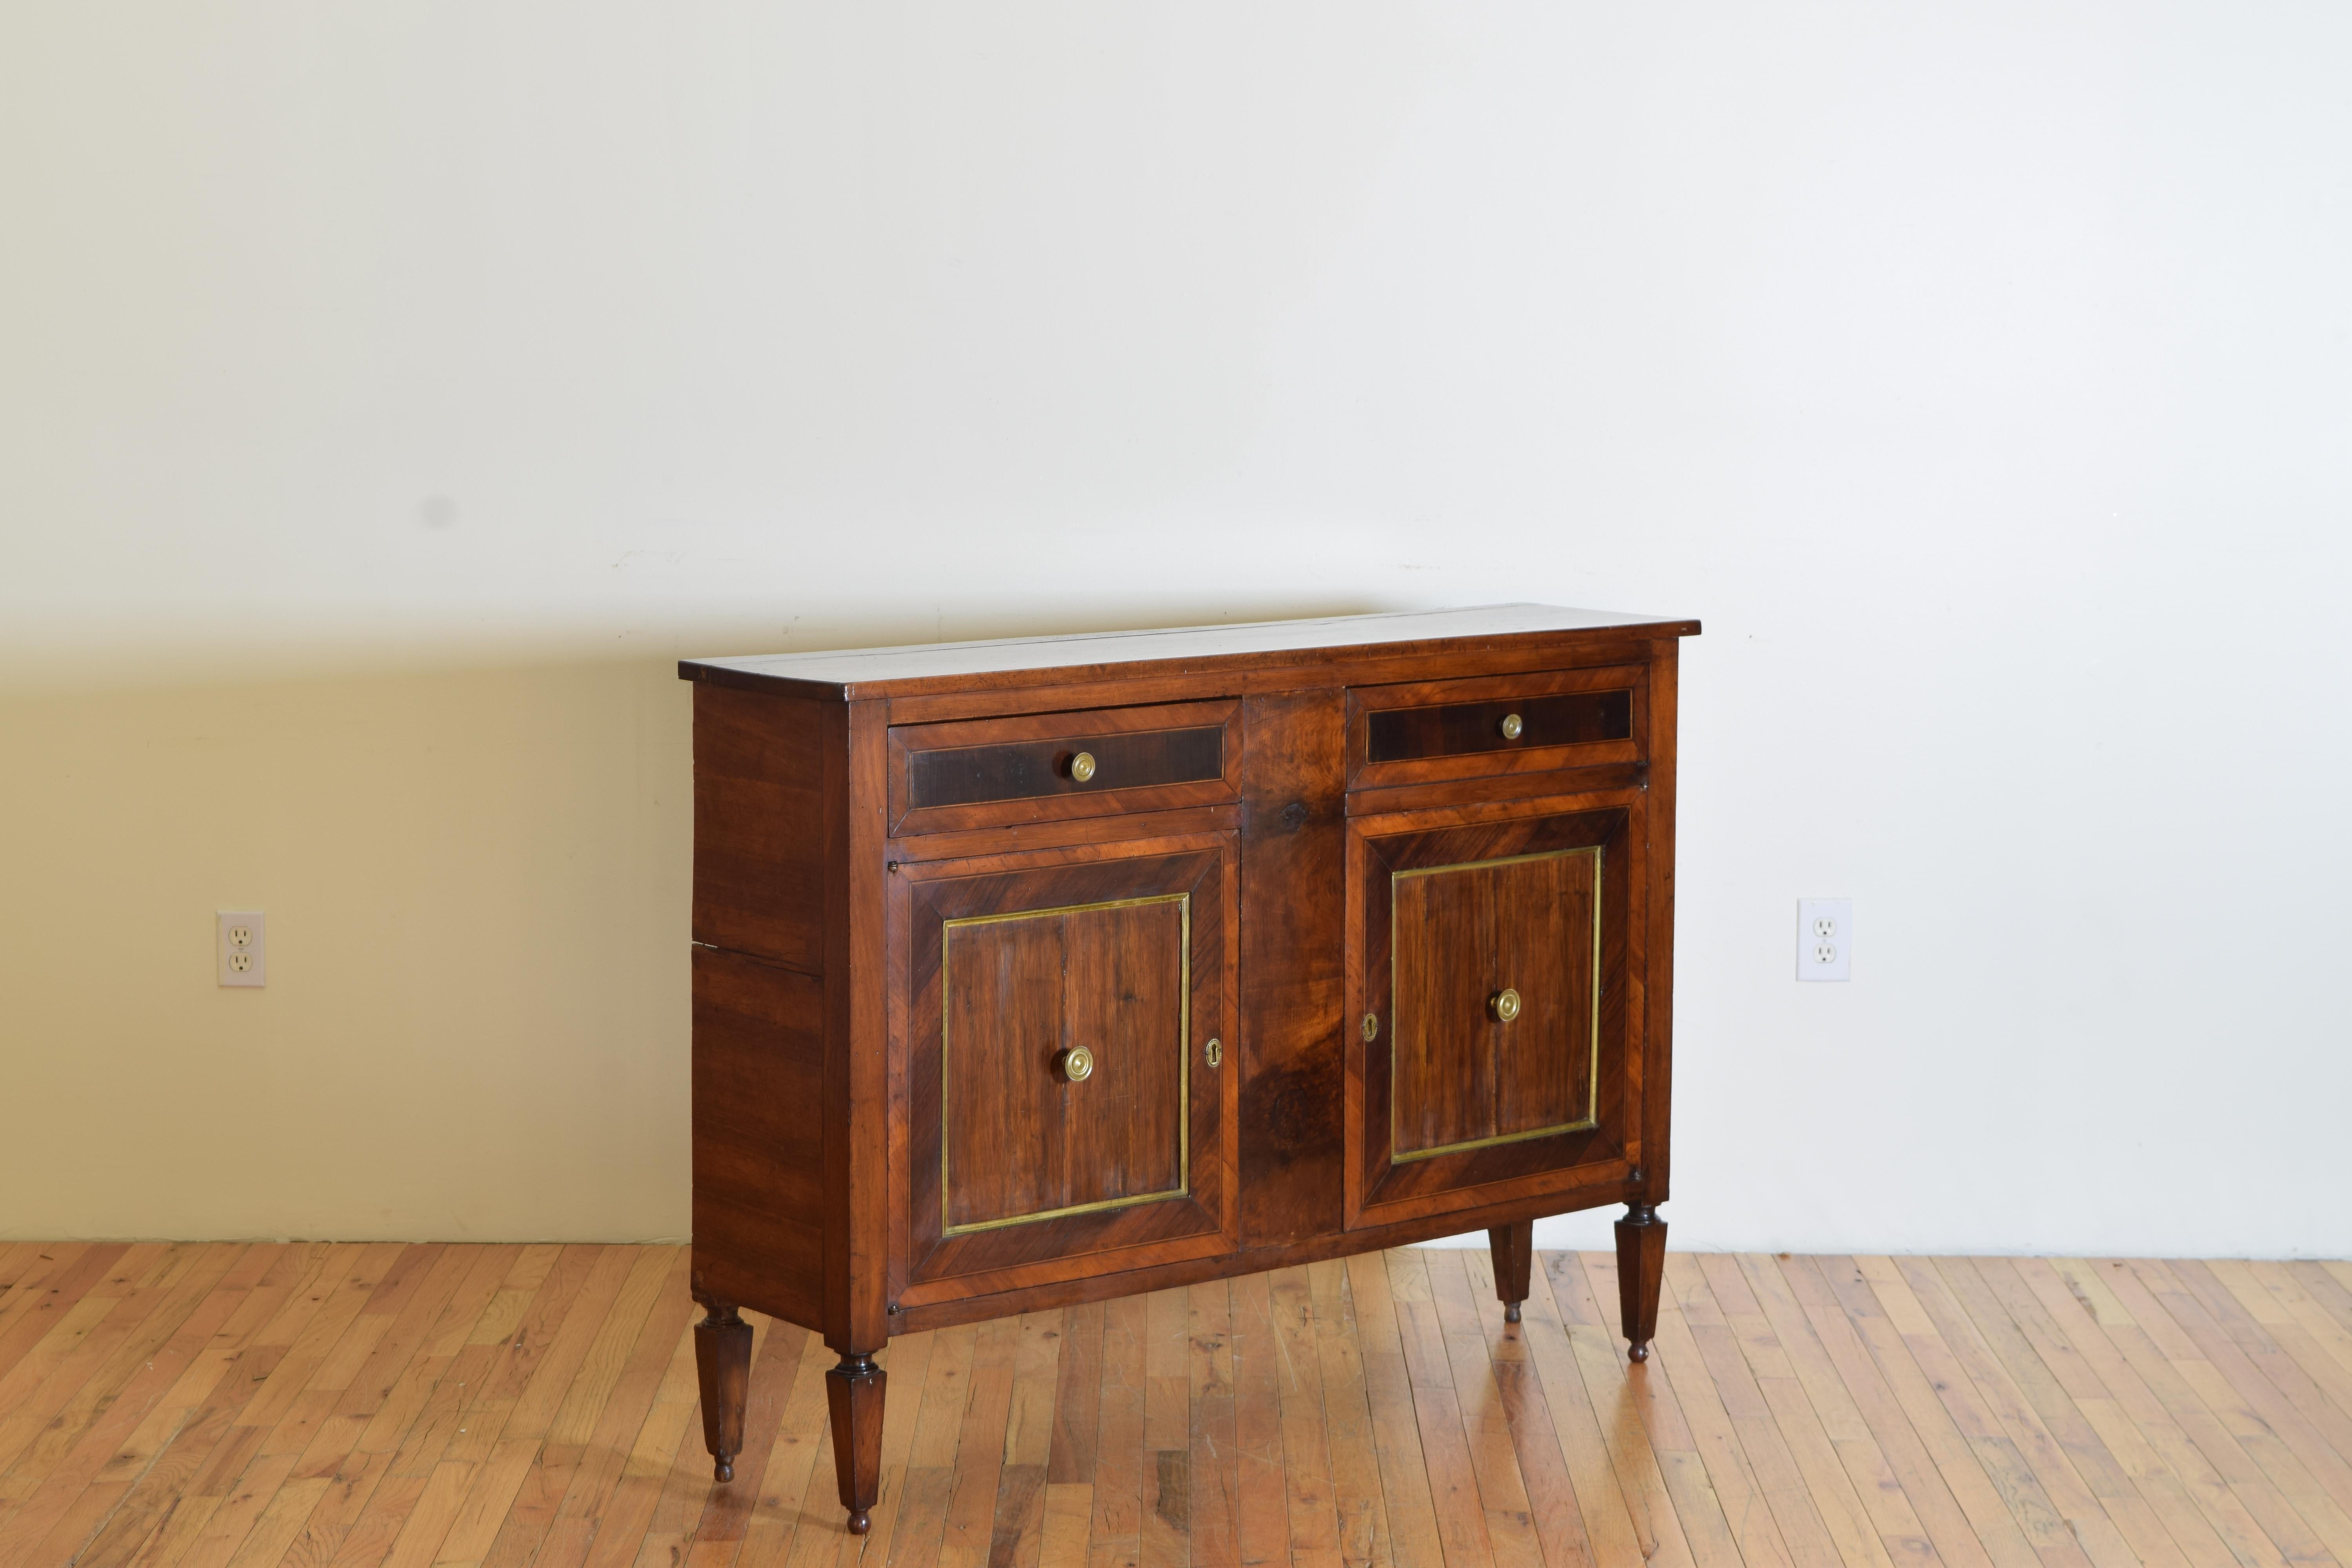 A finely carved handsome credenza with a solid walnut top, veneered walnut sides, banded veneered mahogany inlay on the drawer, and door fronts. The giltwood banded frame the mahogany fronts and brass hardware. The credenza is raised on four